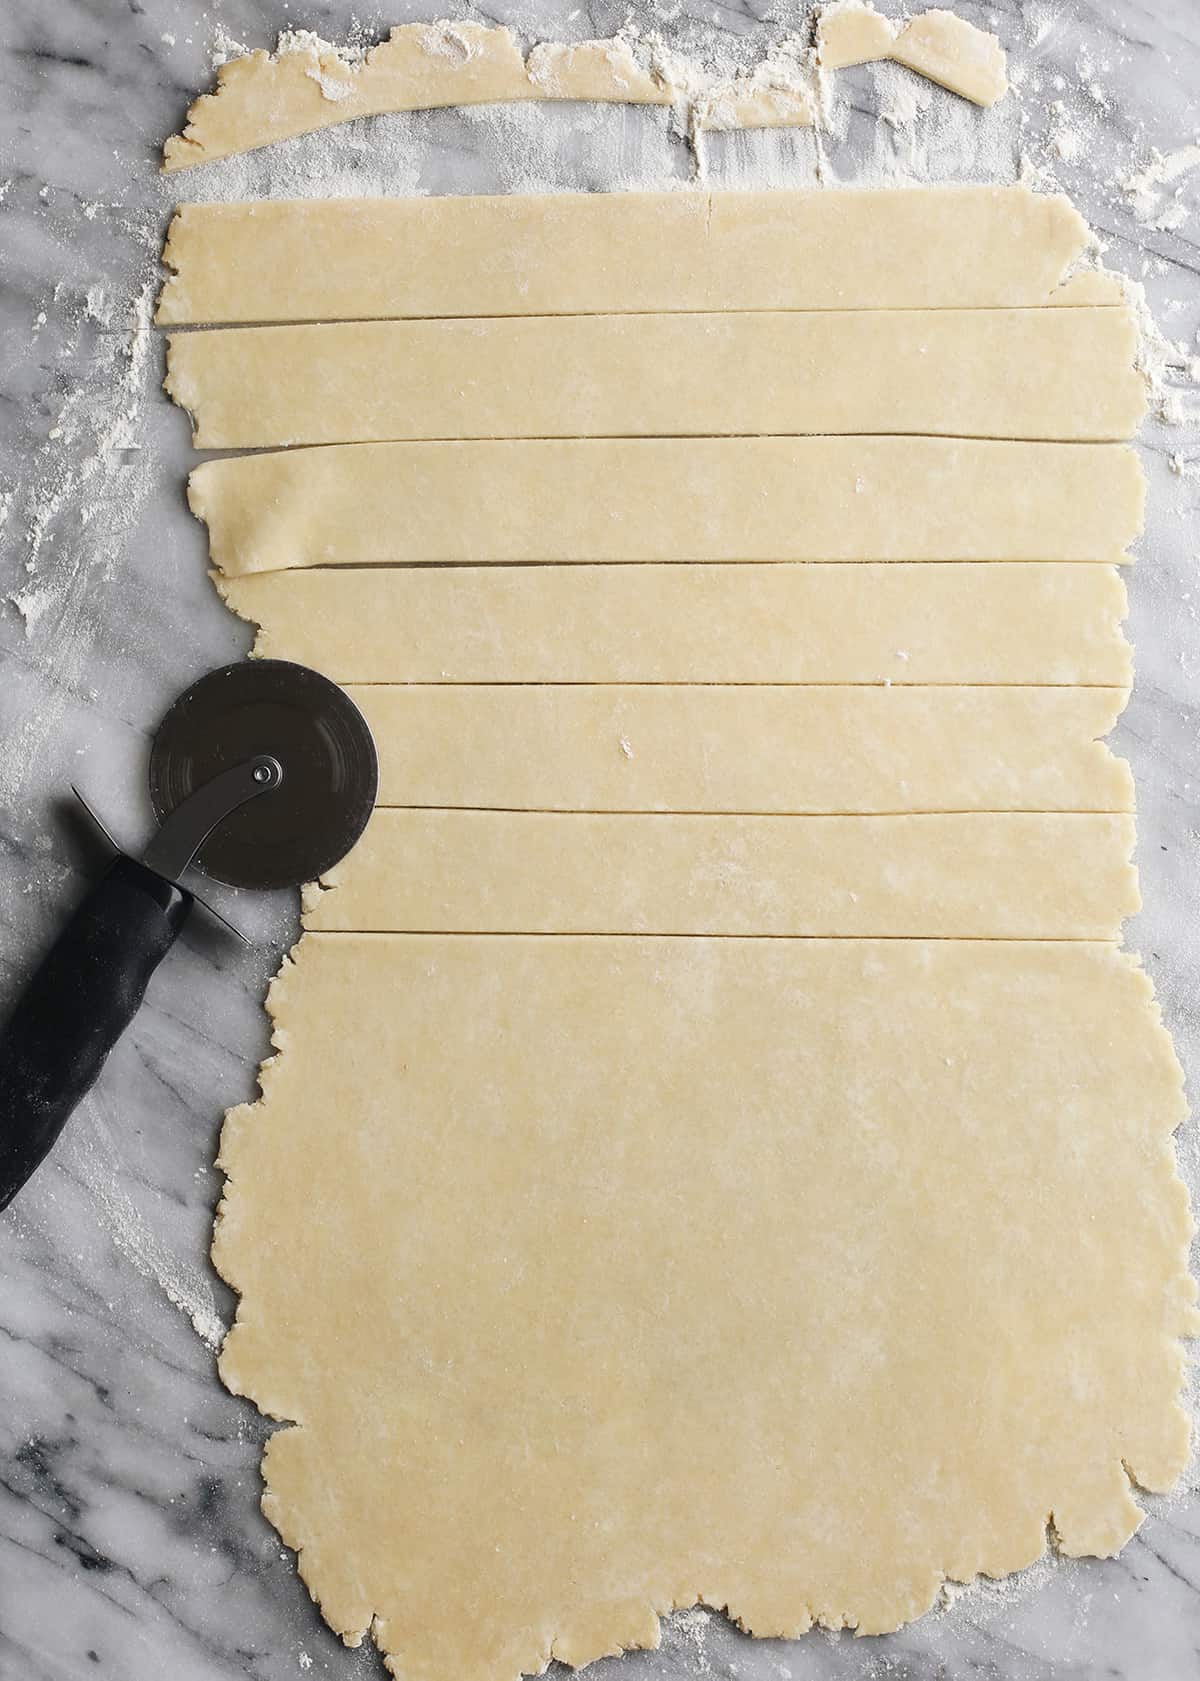 butter pie crust rolled out and being cut to make a lattice top